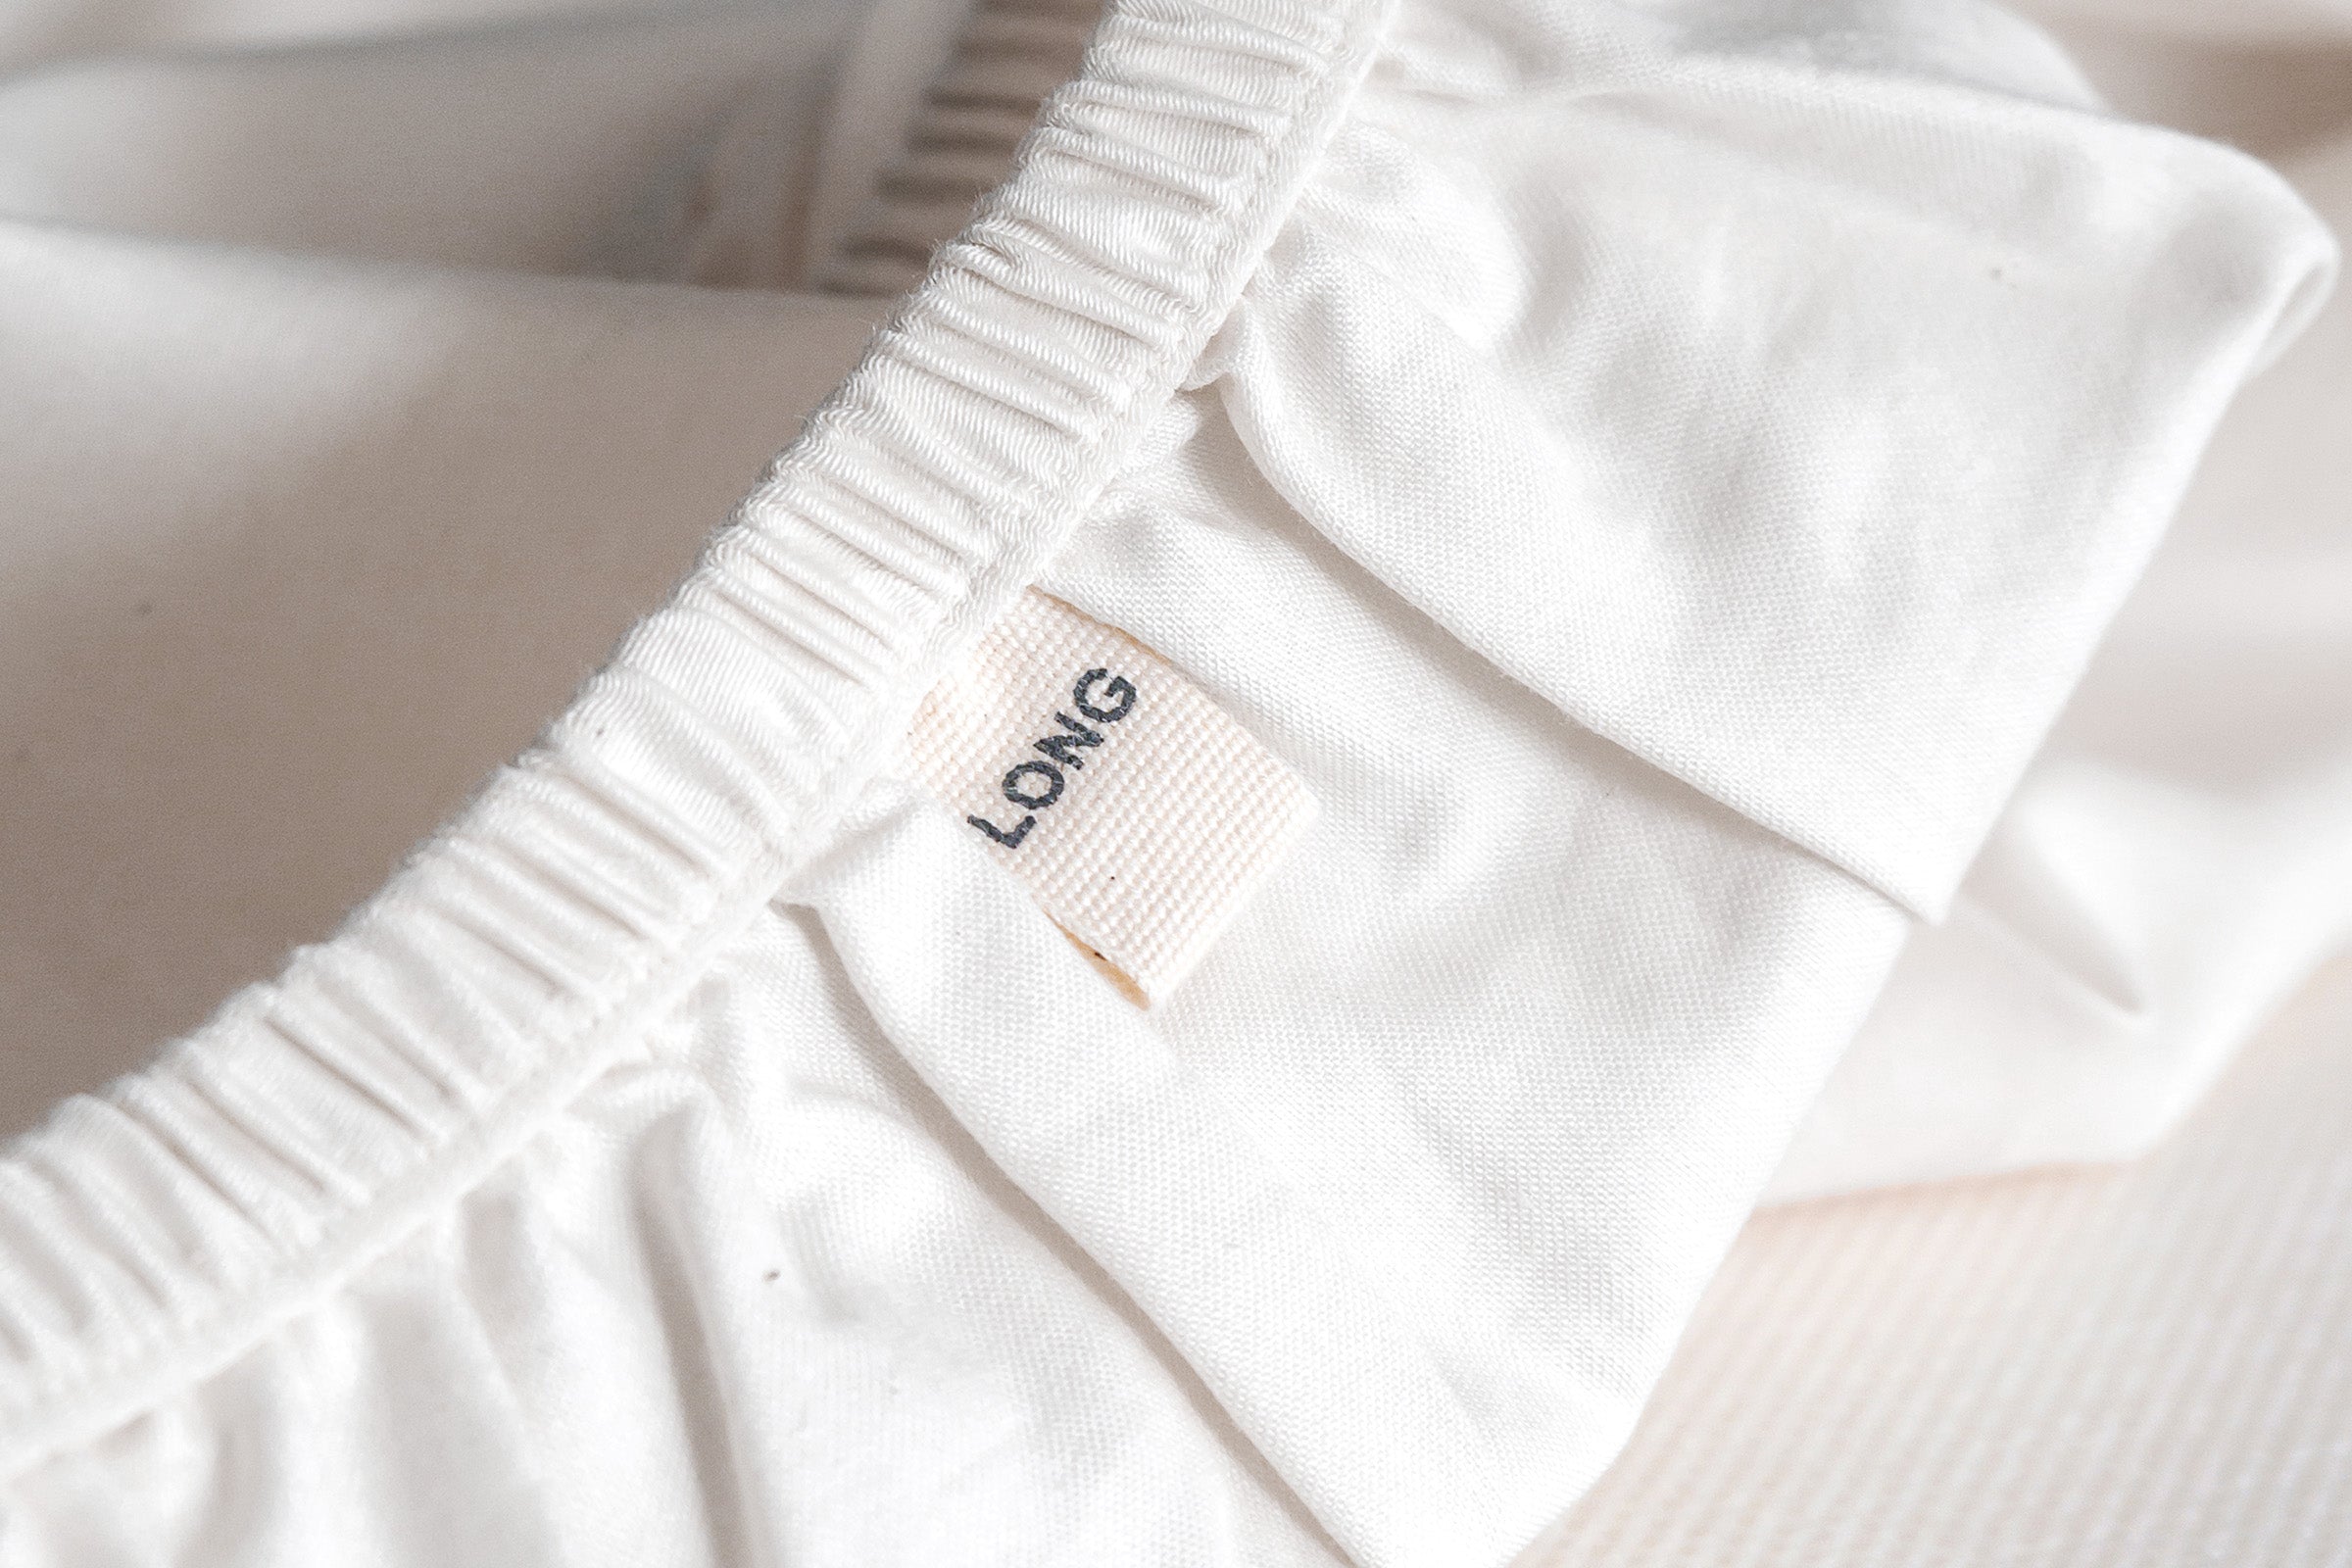 white-organic-crisp-baby-cot-fitted-sheet-close-up-shot-of-long-side-label-by-sojao.jpg